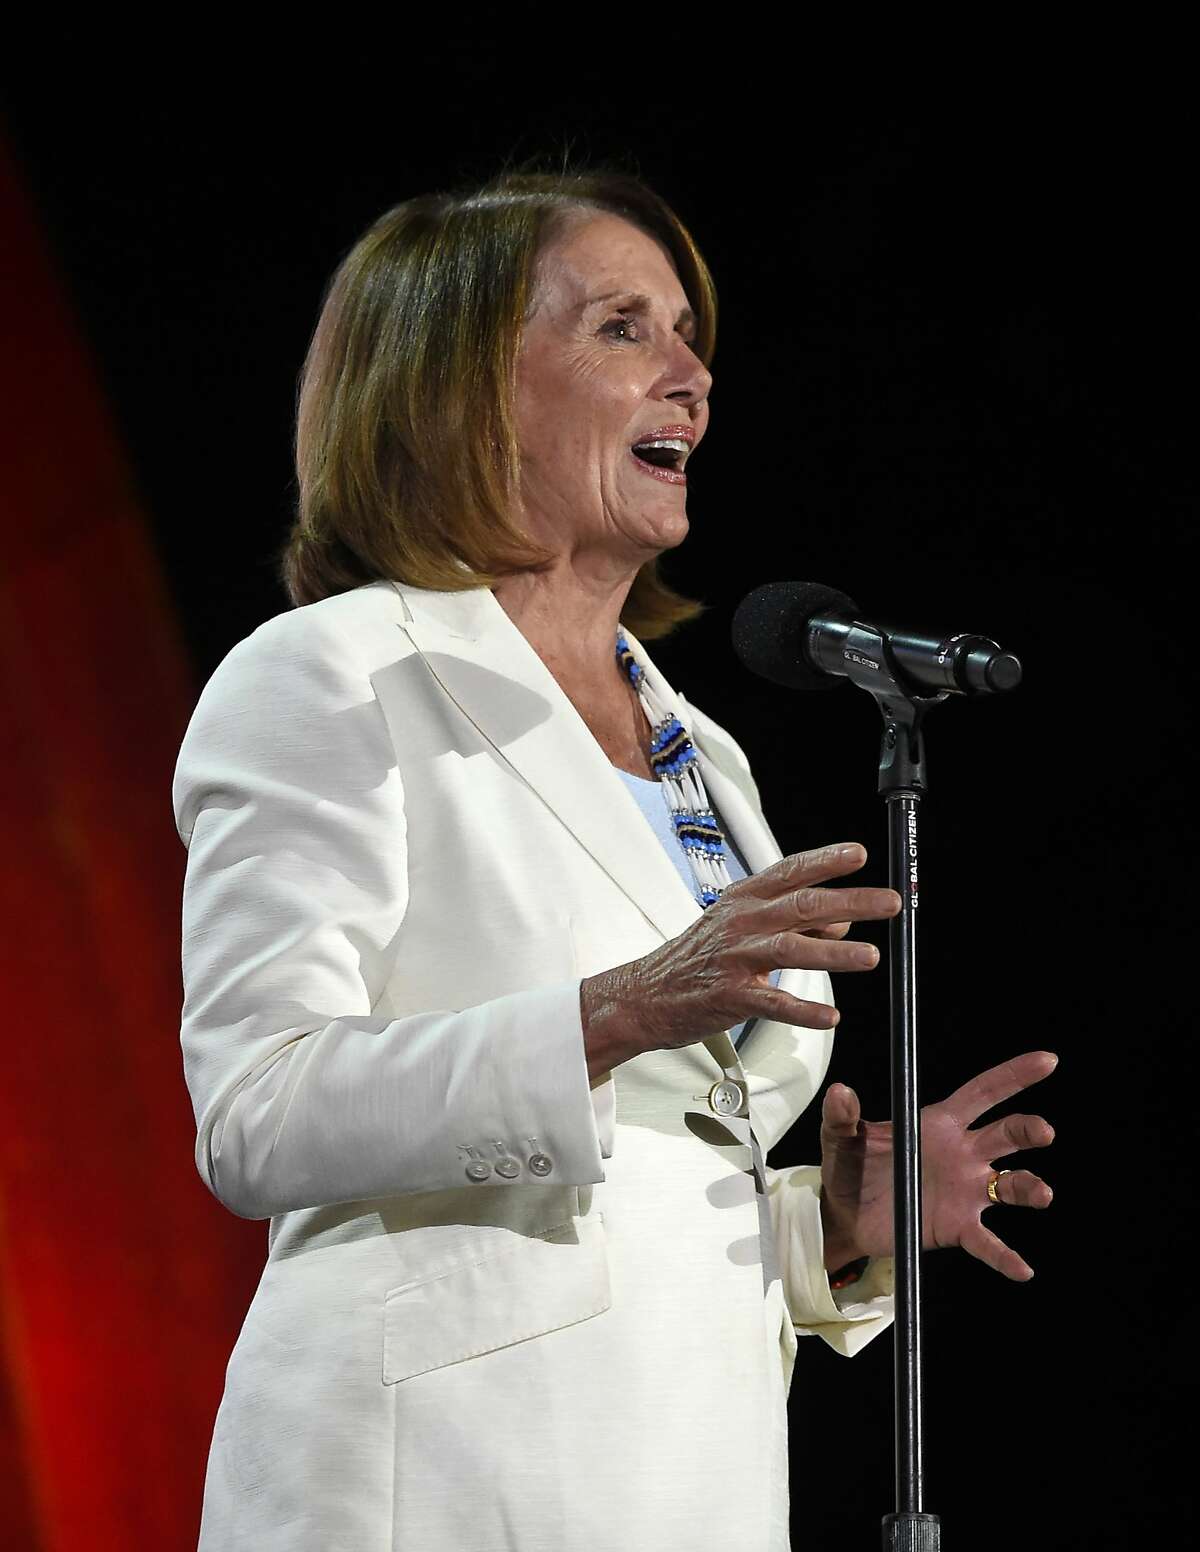 Nancy Pelosi, United States Congresswoman and Minority Leader of the United States House of Representatives speaks to the crowd at the Global Citizen Festival in New York., Saturday, Sept. 24, 2016. (AP Photo/Kathy Kmonicek)